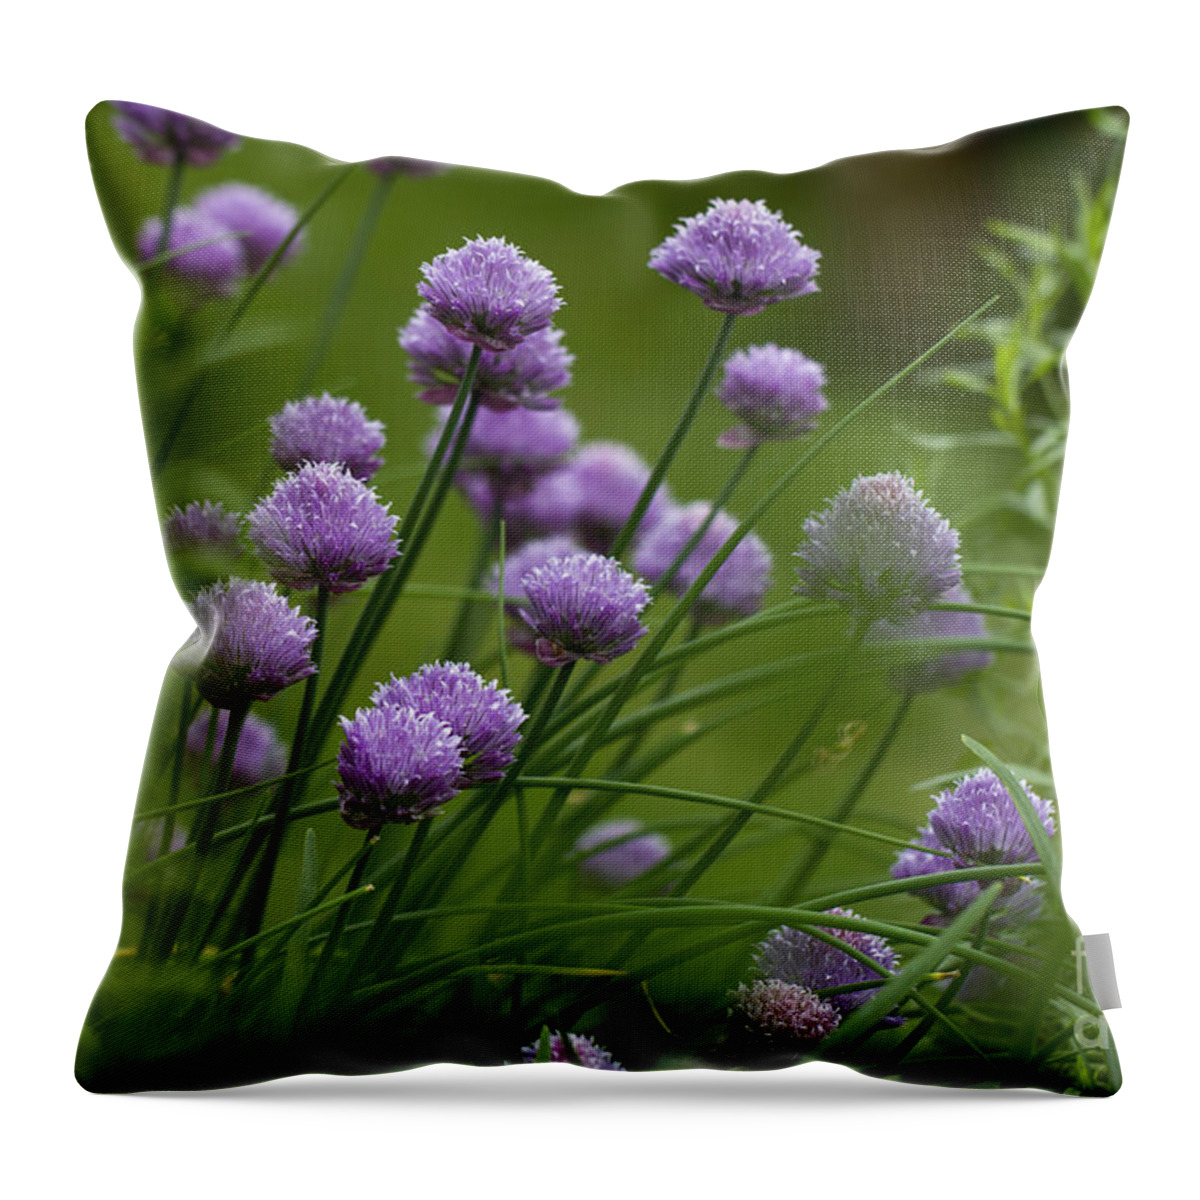 Clare Bambers Throw Pillow featuring the photograph Herb Garden. by Clare Bambers